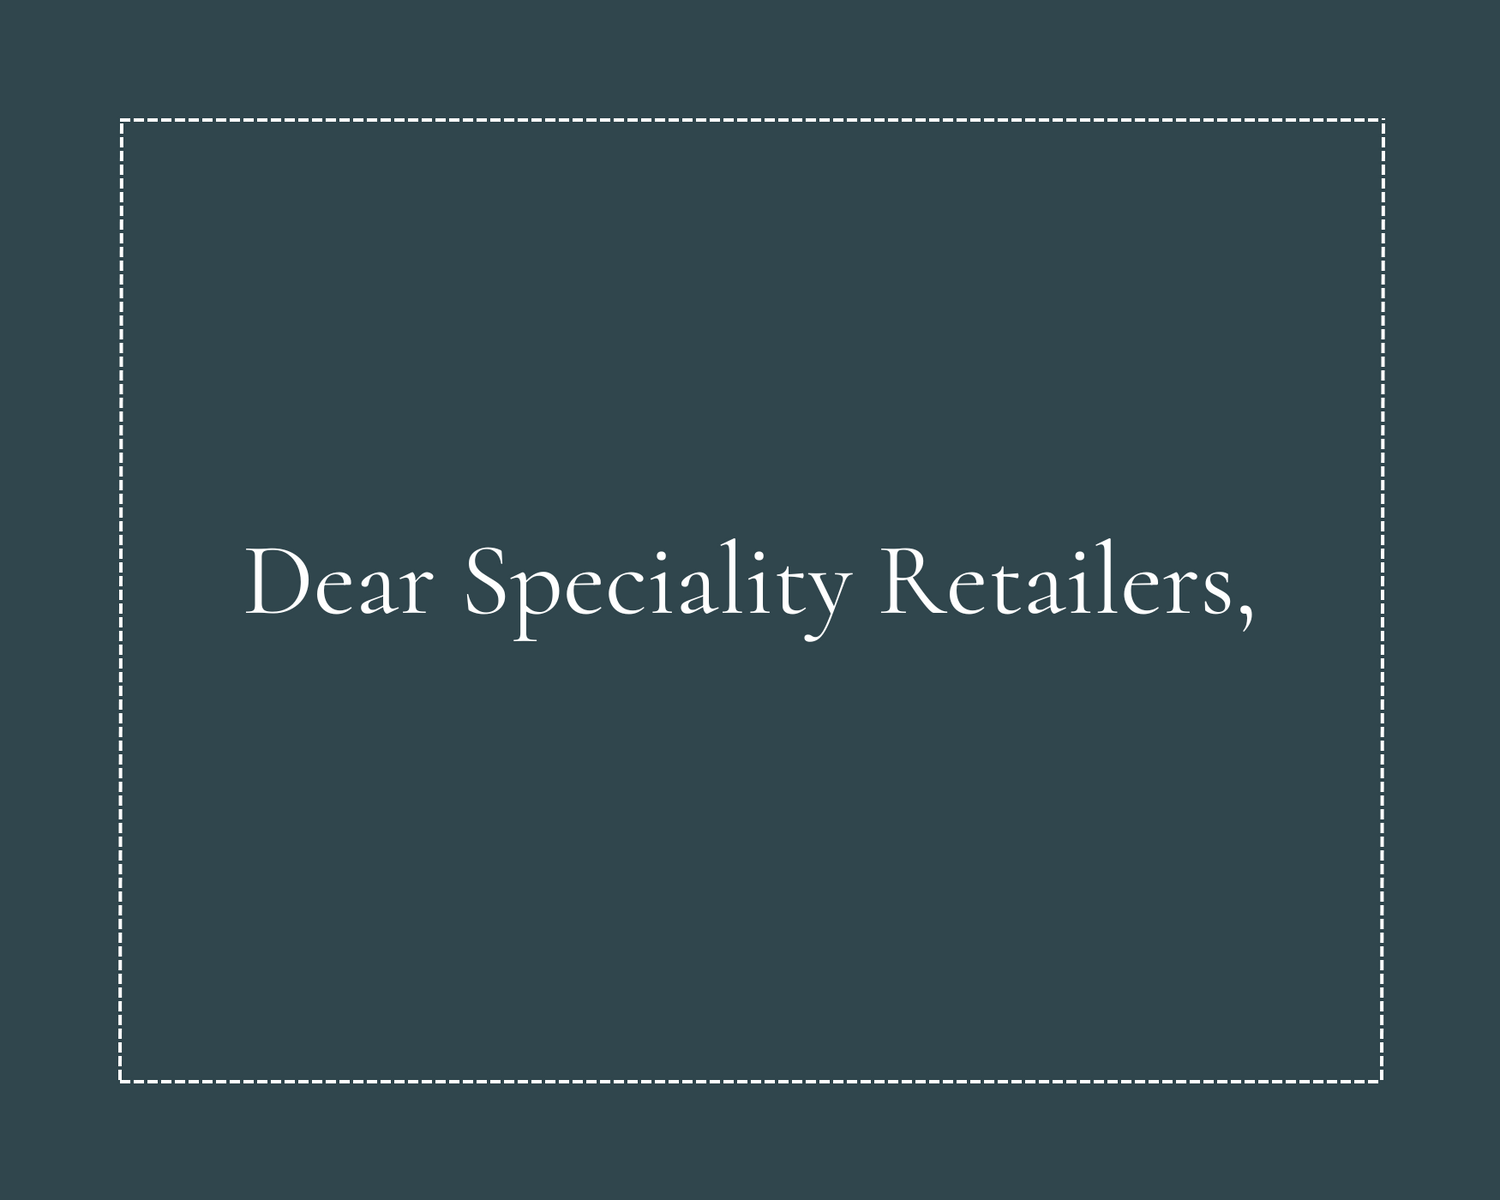 Why ROUS for Specialty Retailers